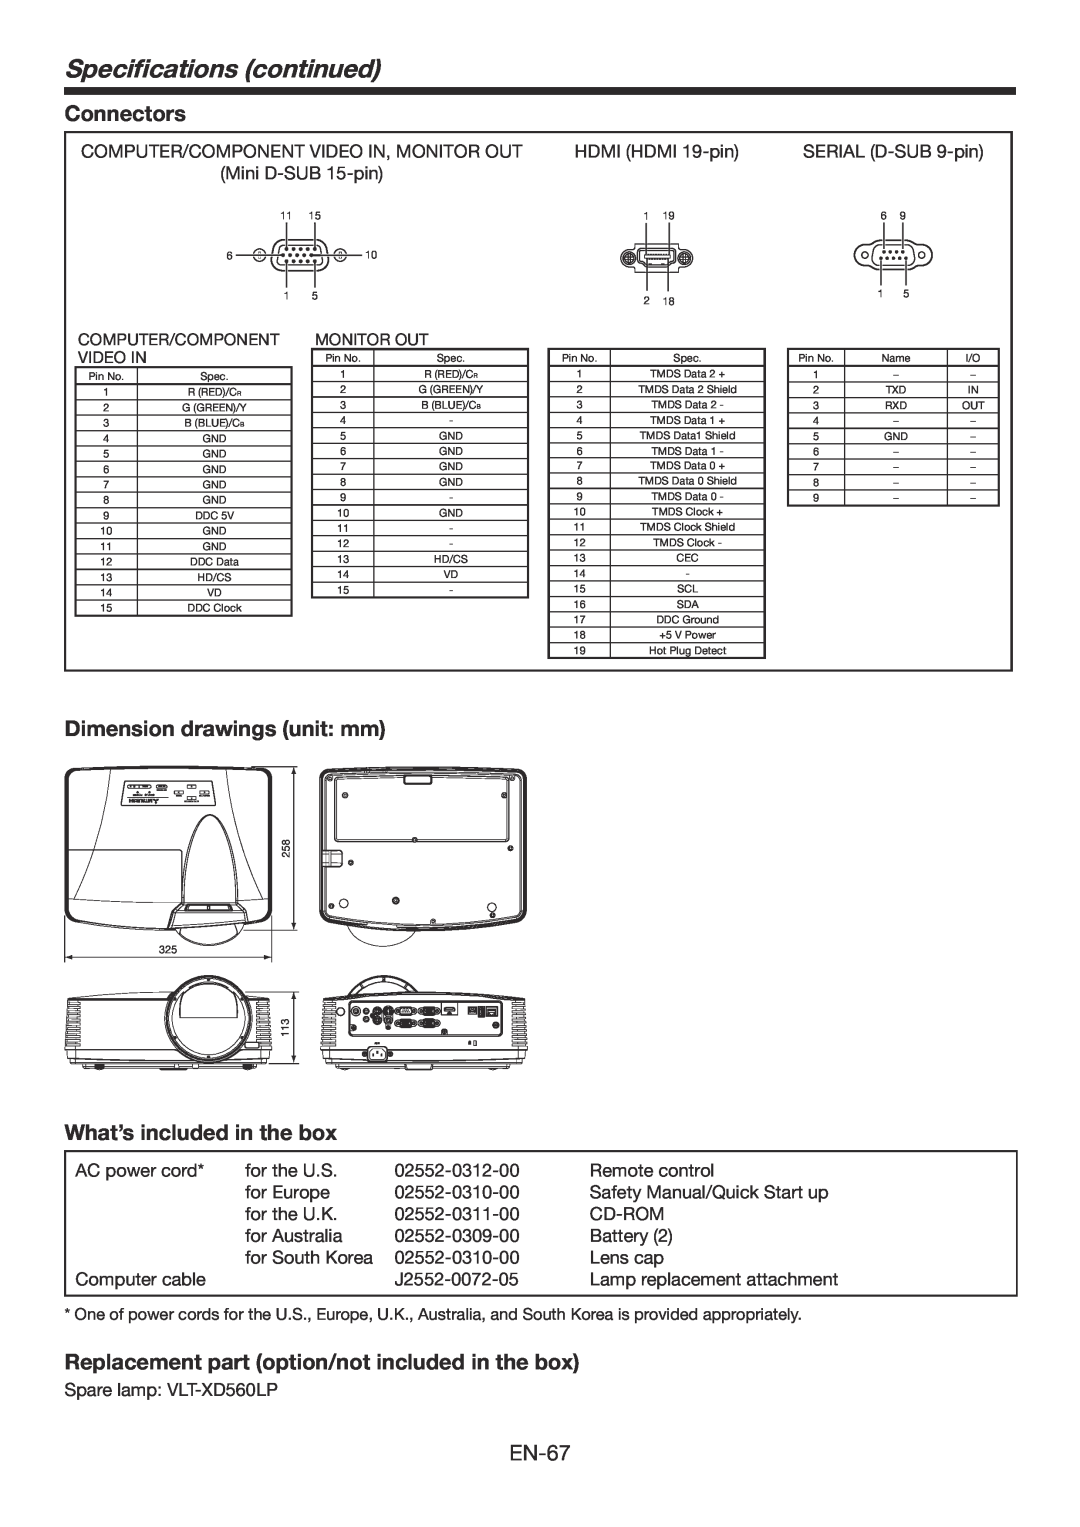 Mitsubishi Electronics WD390U-EST user manual Specifications continued, Connectors, Dimension drawings unit mm 